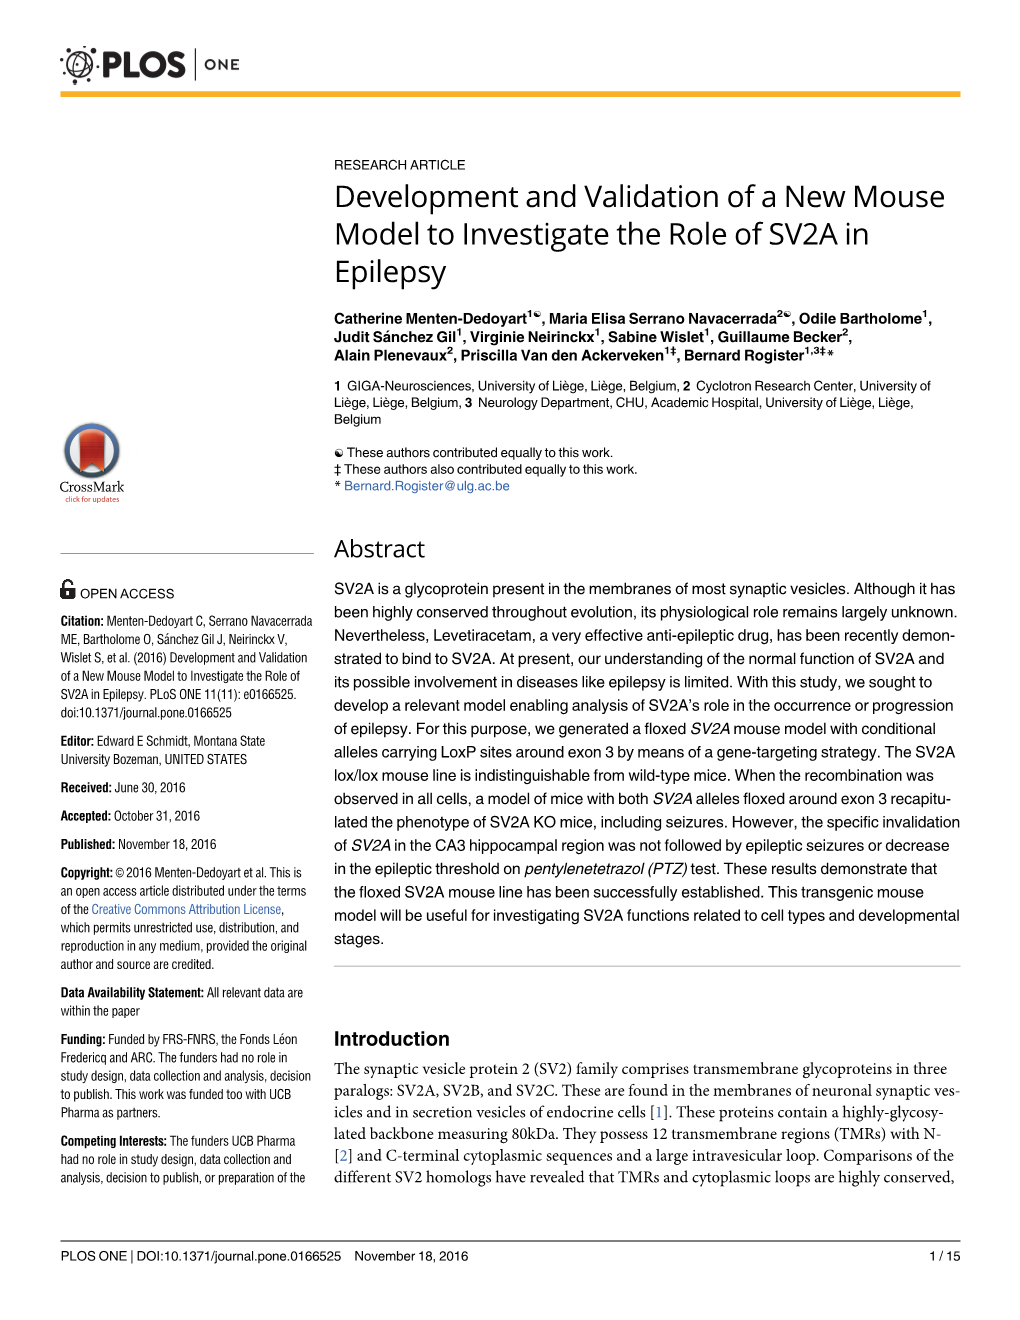 Development and Validation of a New Mouse Model to Investigate the Role of SV2A in Epilepsy